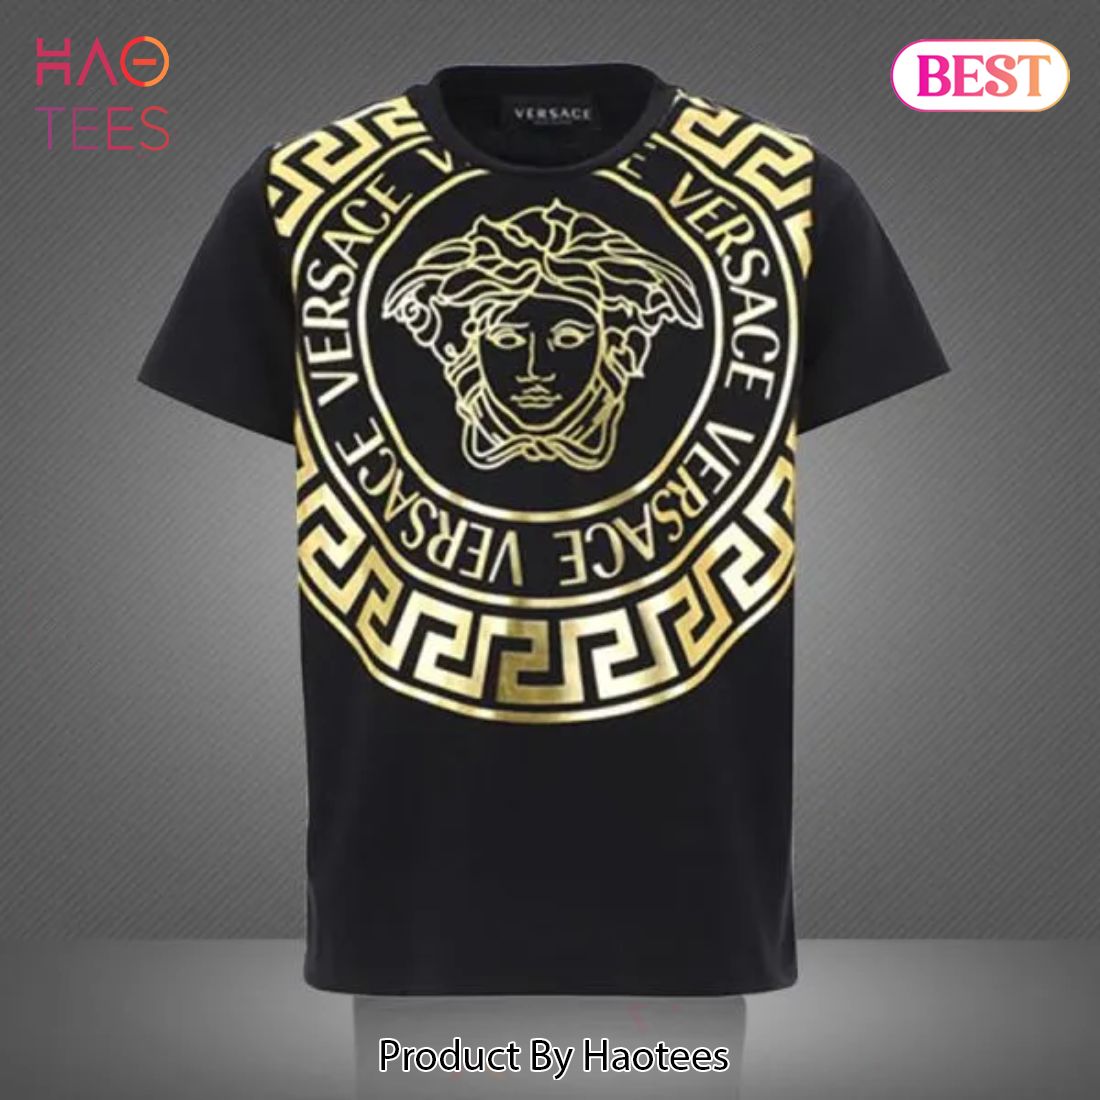 VERSACE T-shirt in black/ gold